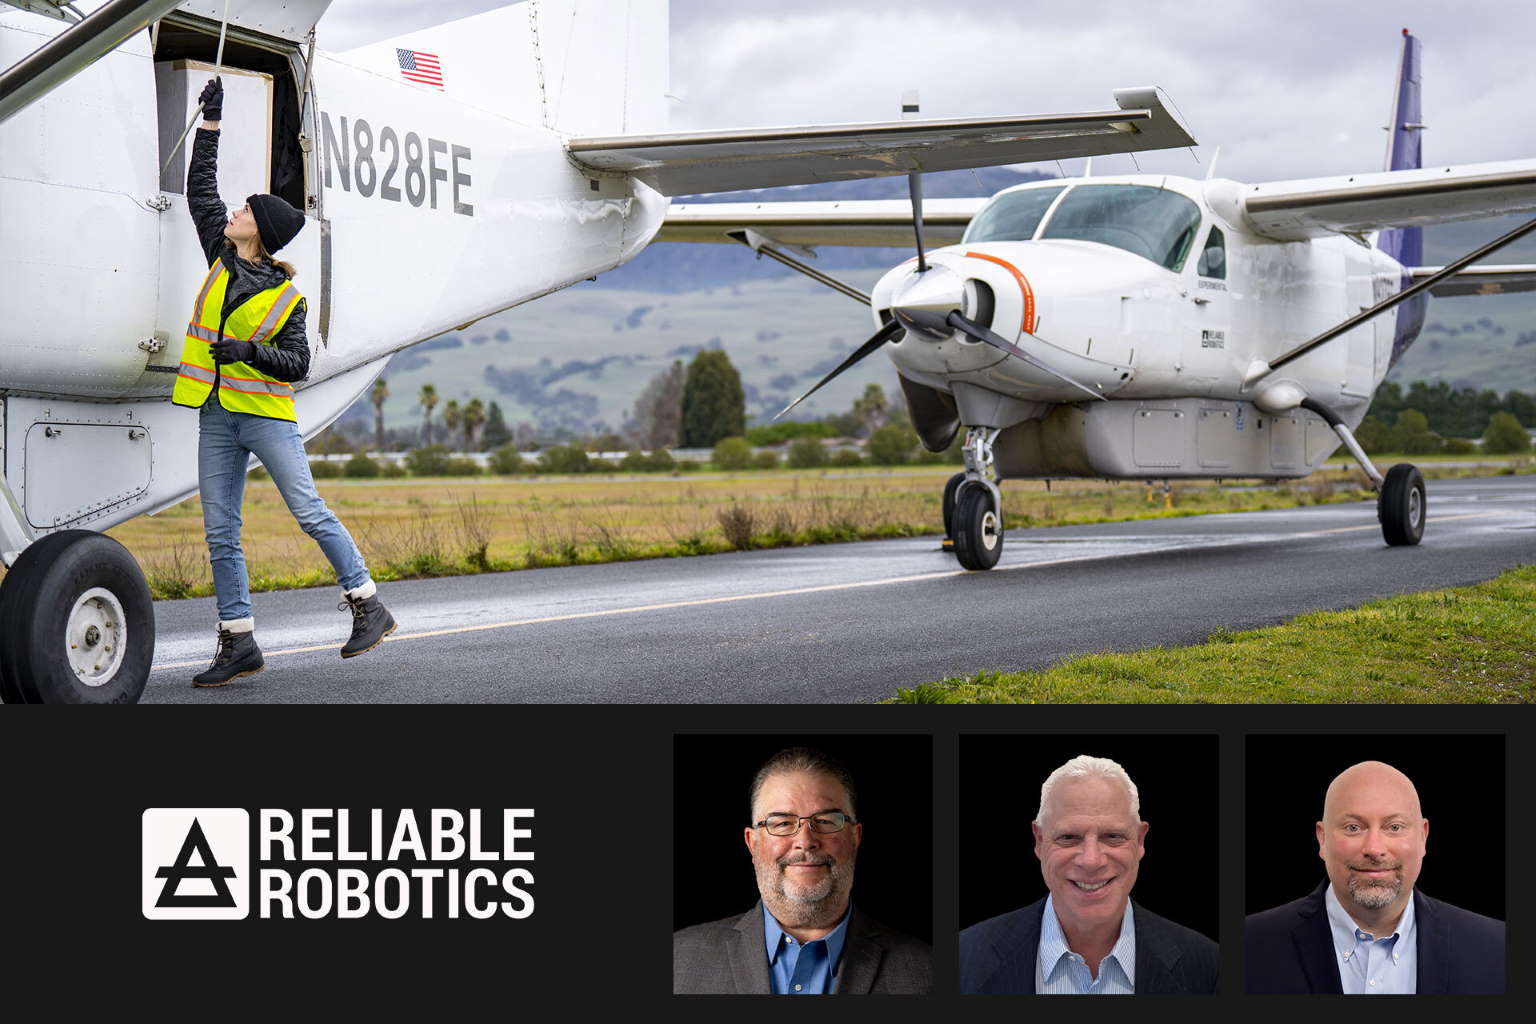 Dependable Robotics broadcasts New Cargo airline led by trade veterans – sUAS Information